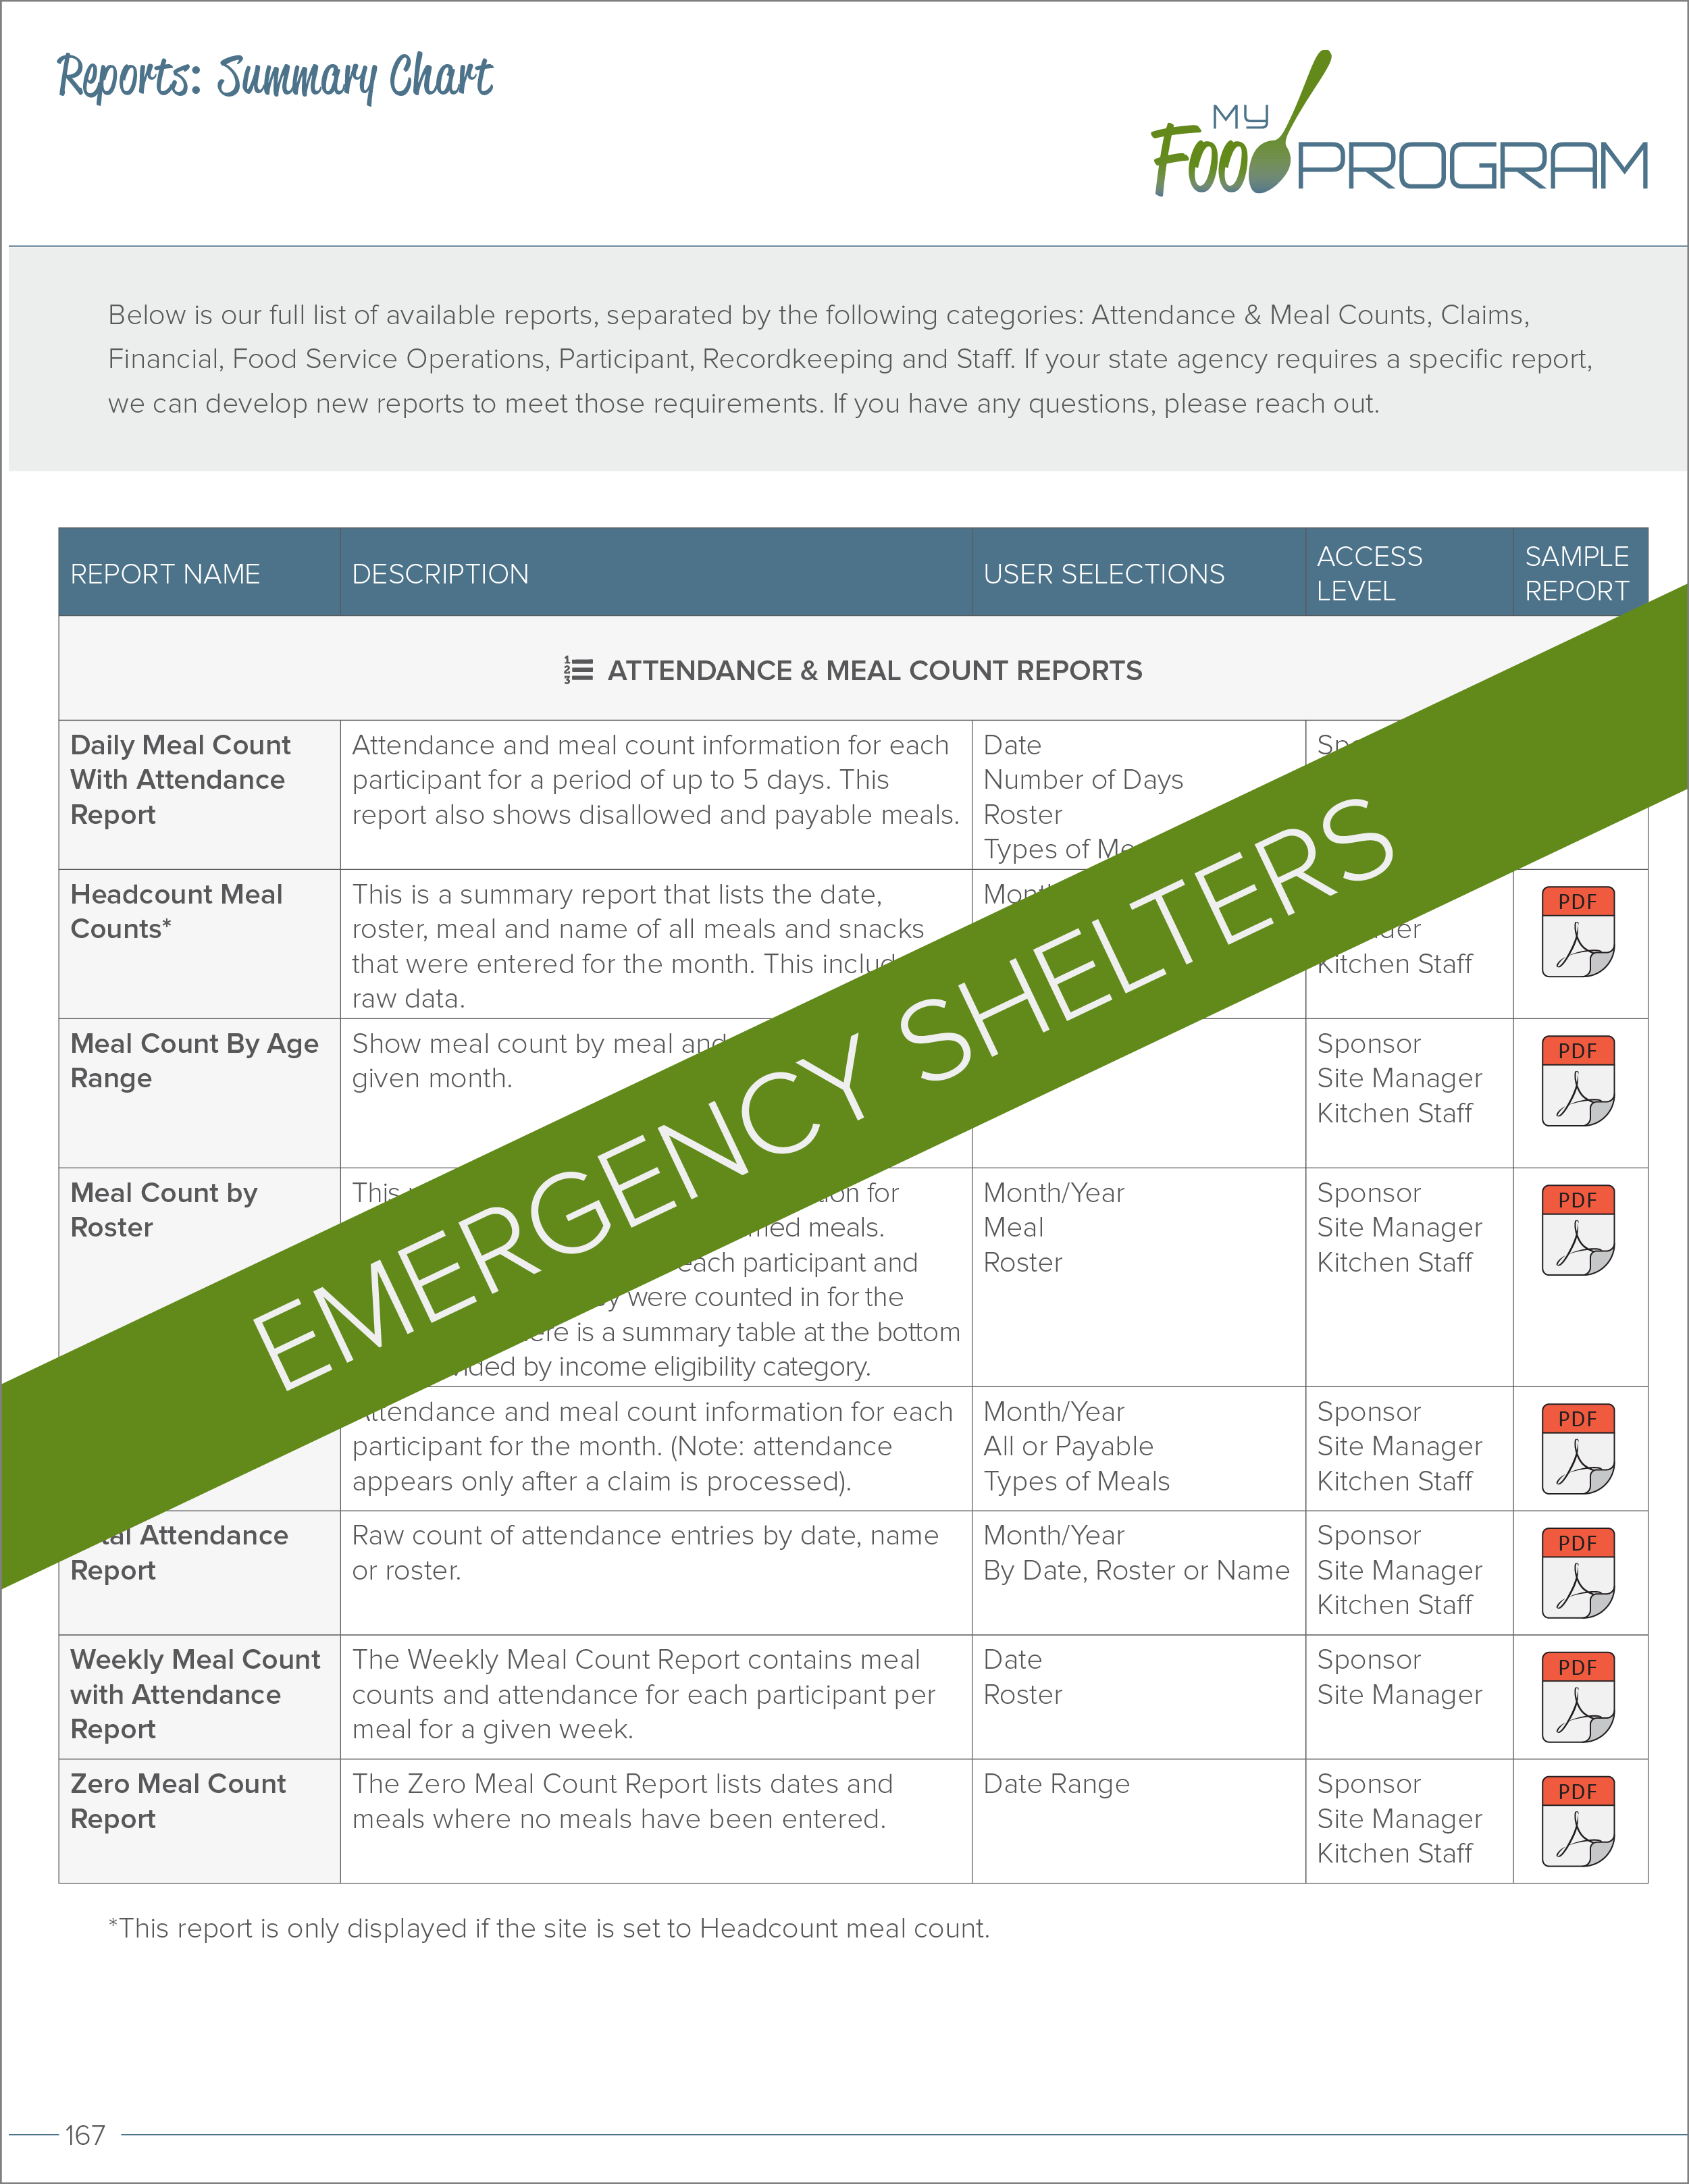 Emergency Shelters Reports Summary Chart